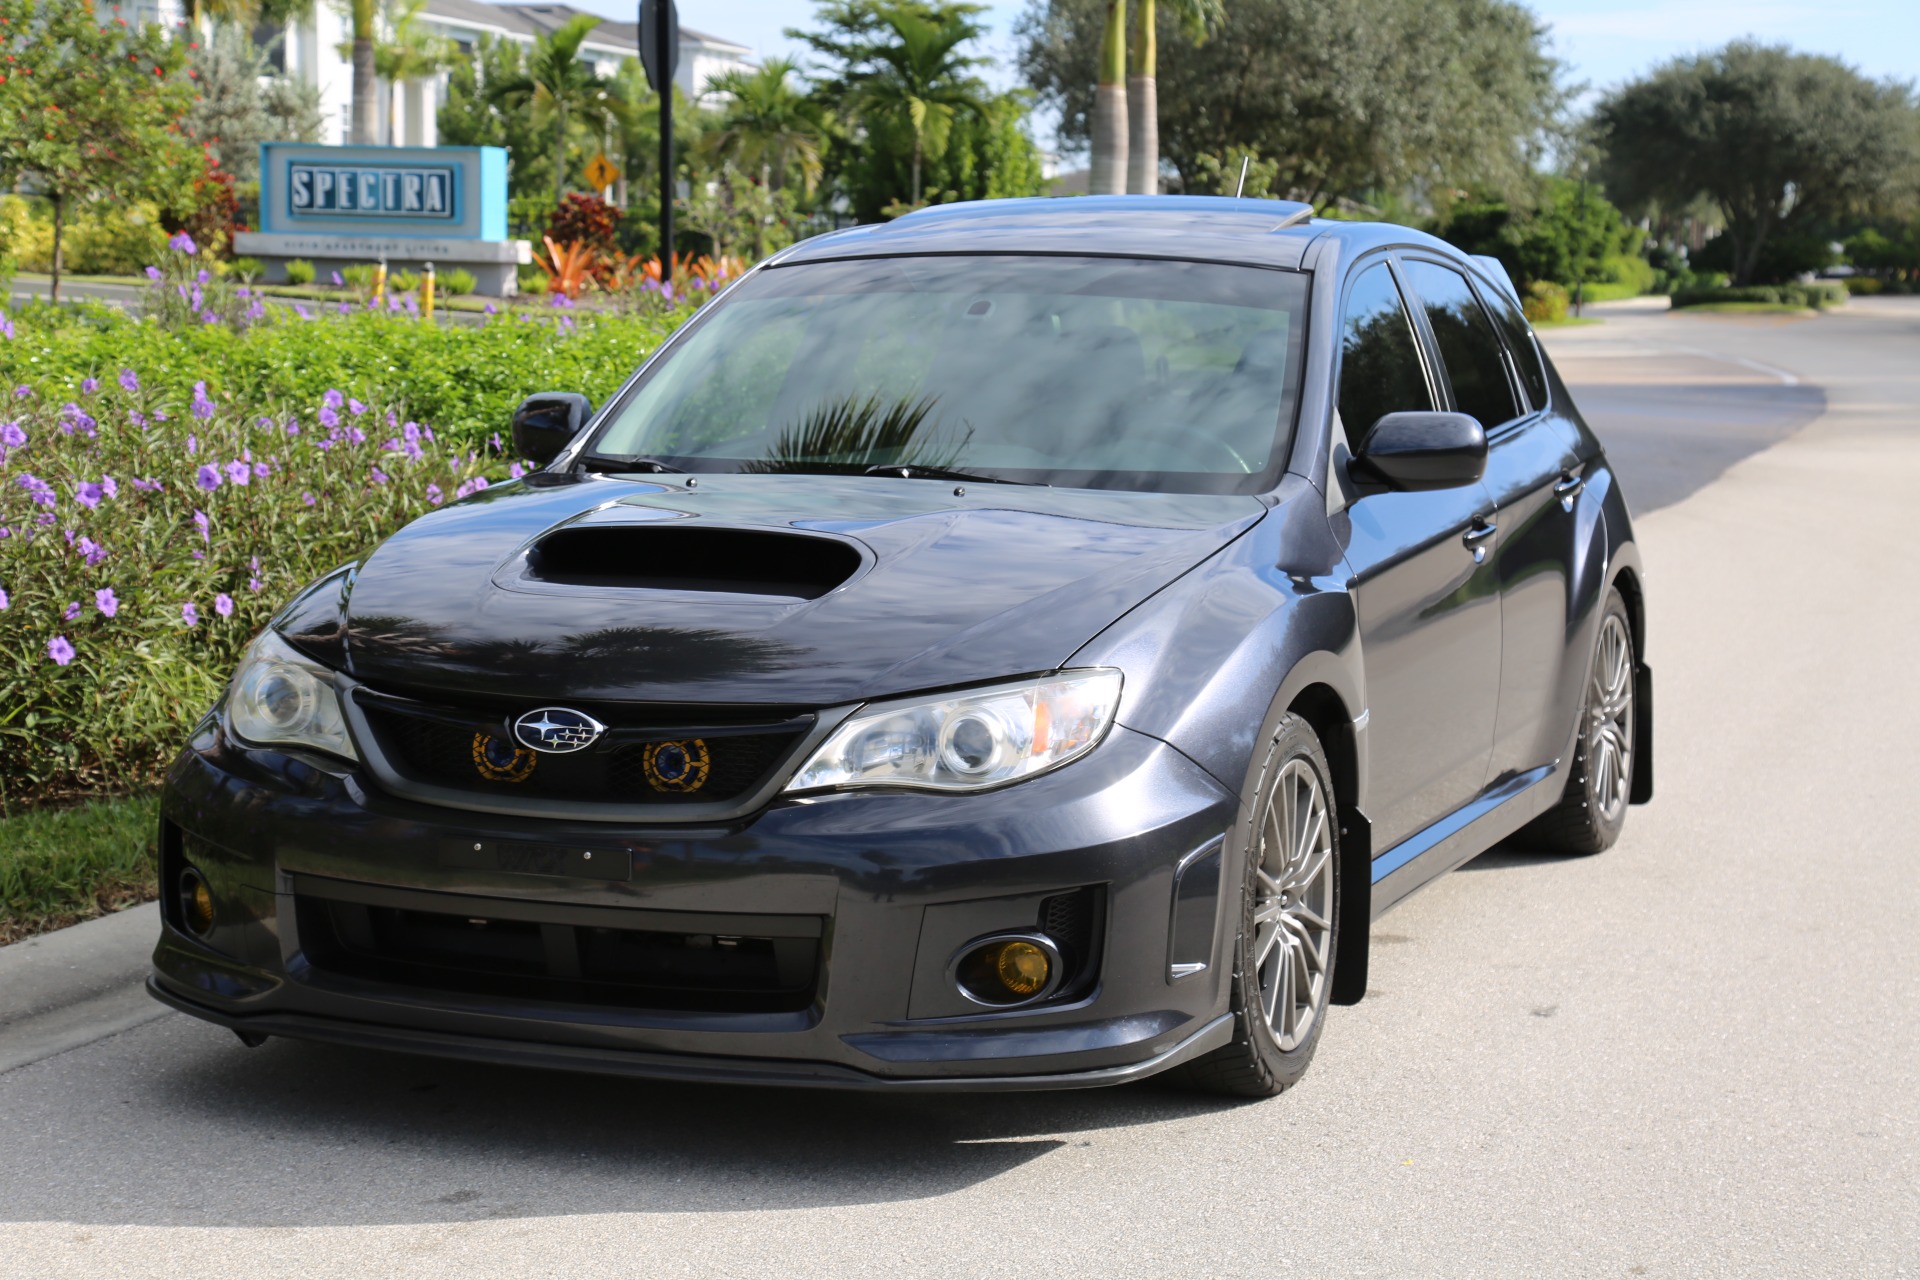 Used 2013 Subaru Impreza WRX Premium Hatch for sale Sold at Muscle Cars for Sale Inc. in Fort Myers FL 33912 3